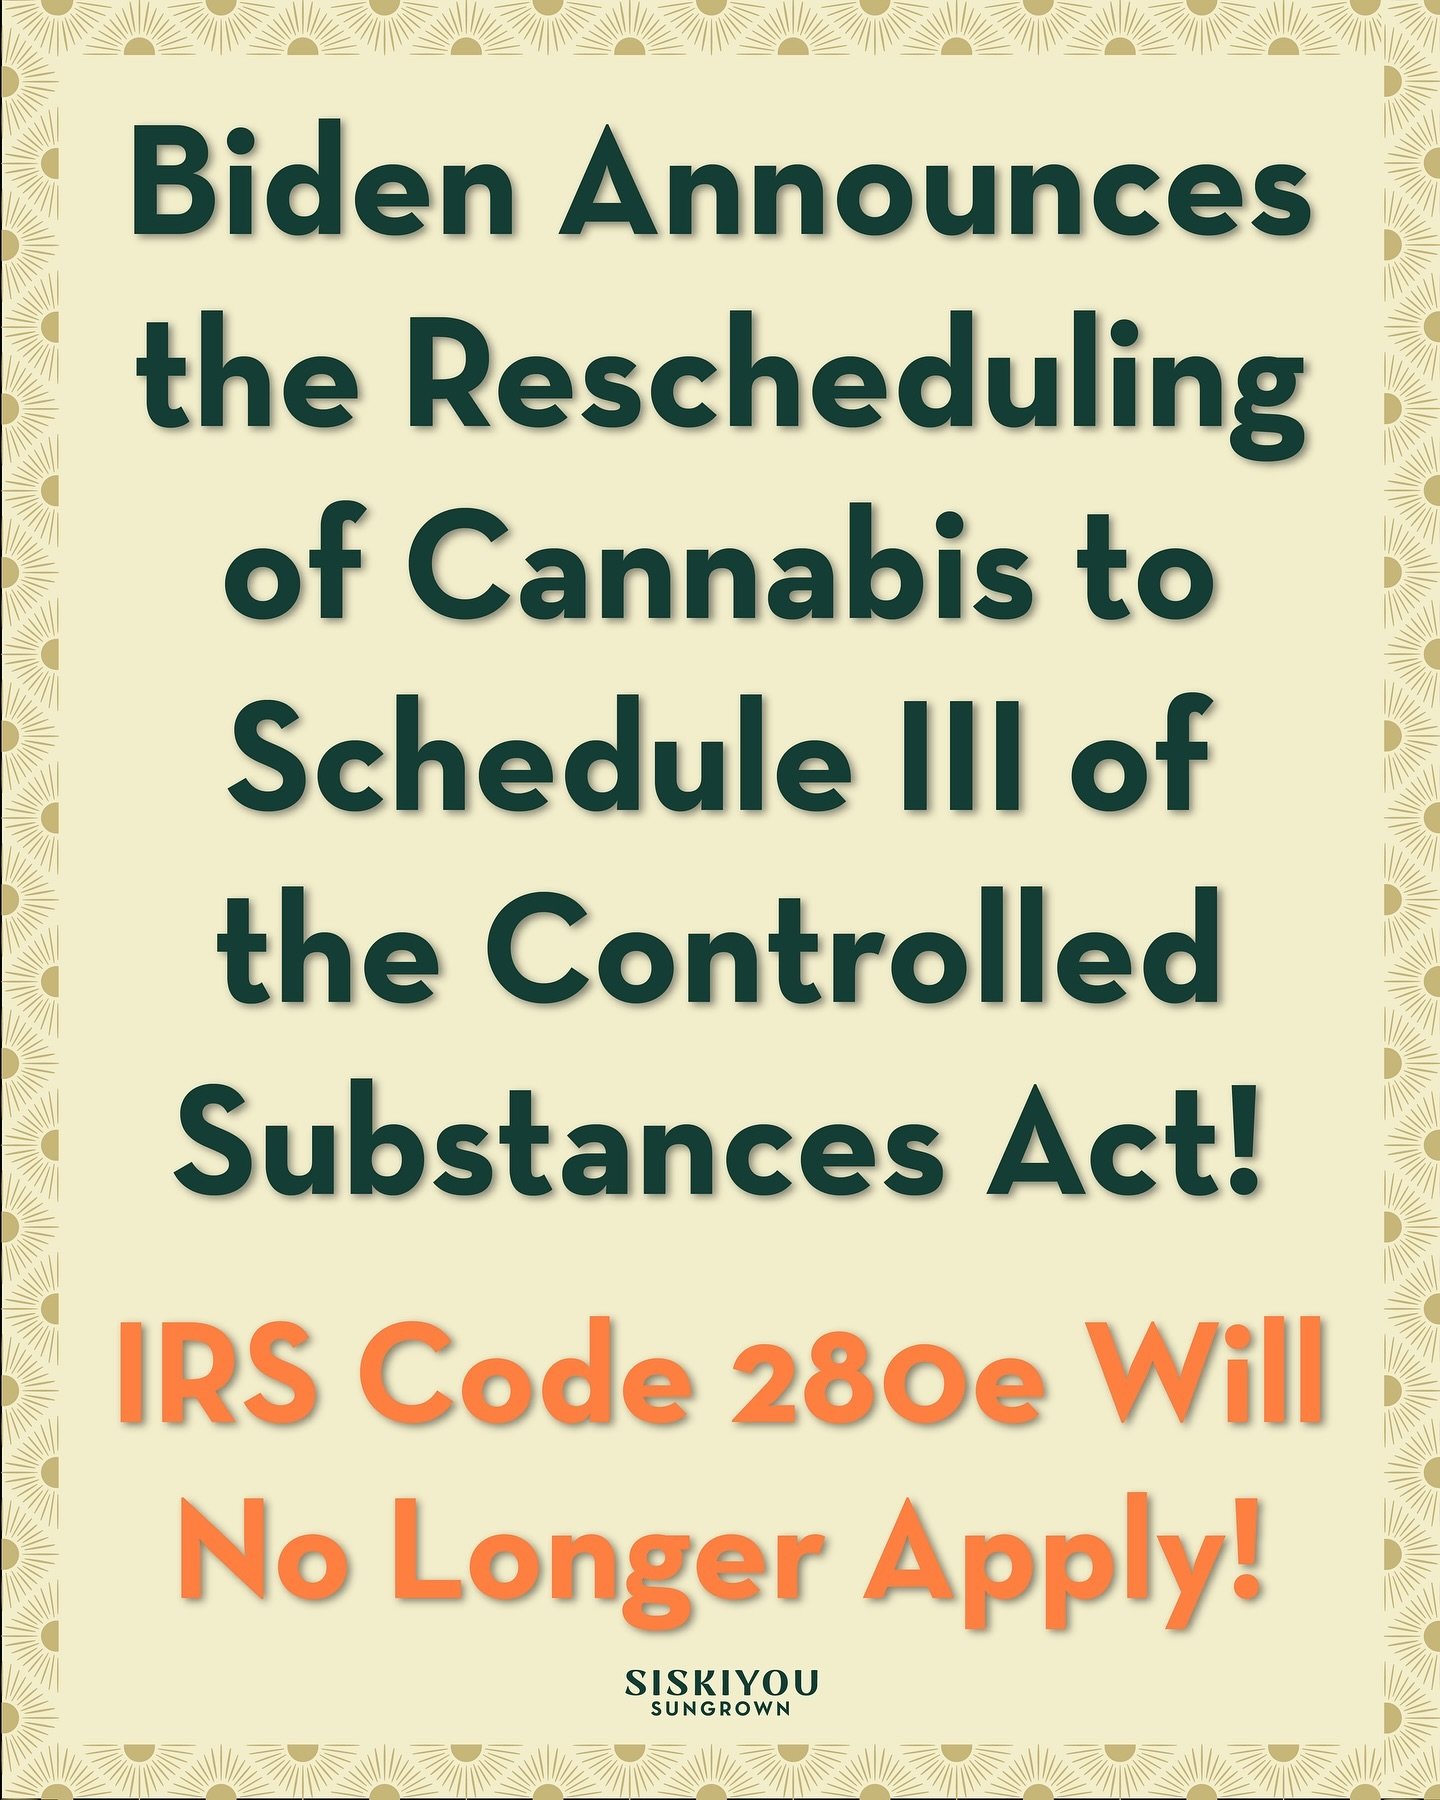 With a move that has been anticipated for years, President Joe Biden announced the imminent reclassification of cannabis from Schedule I of the Controlled Substances Act to Schedule III. This acknowledges the established medical use of cannabis, faci